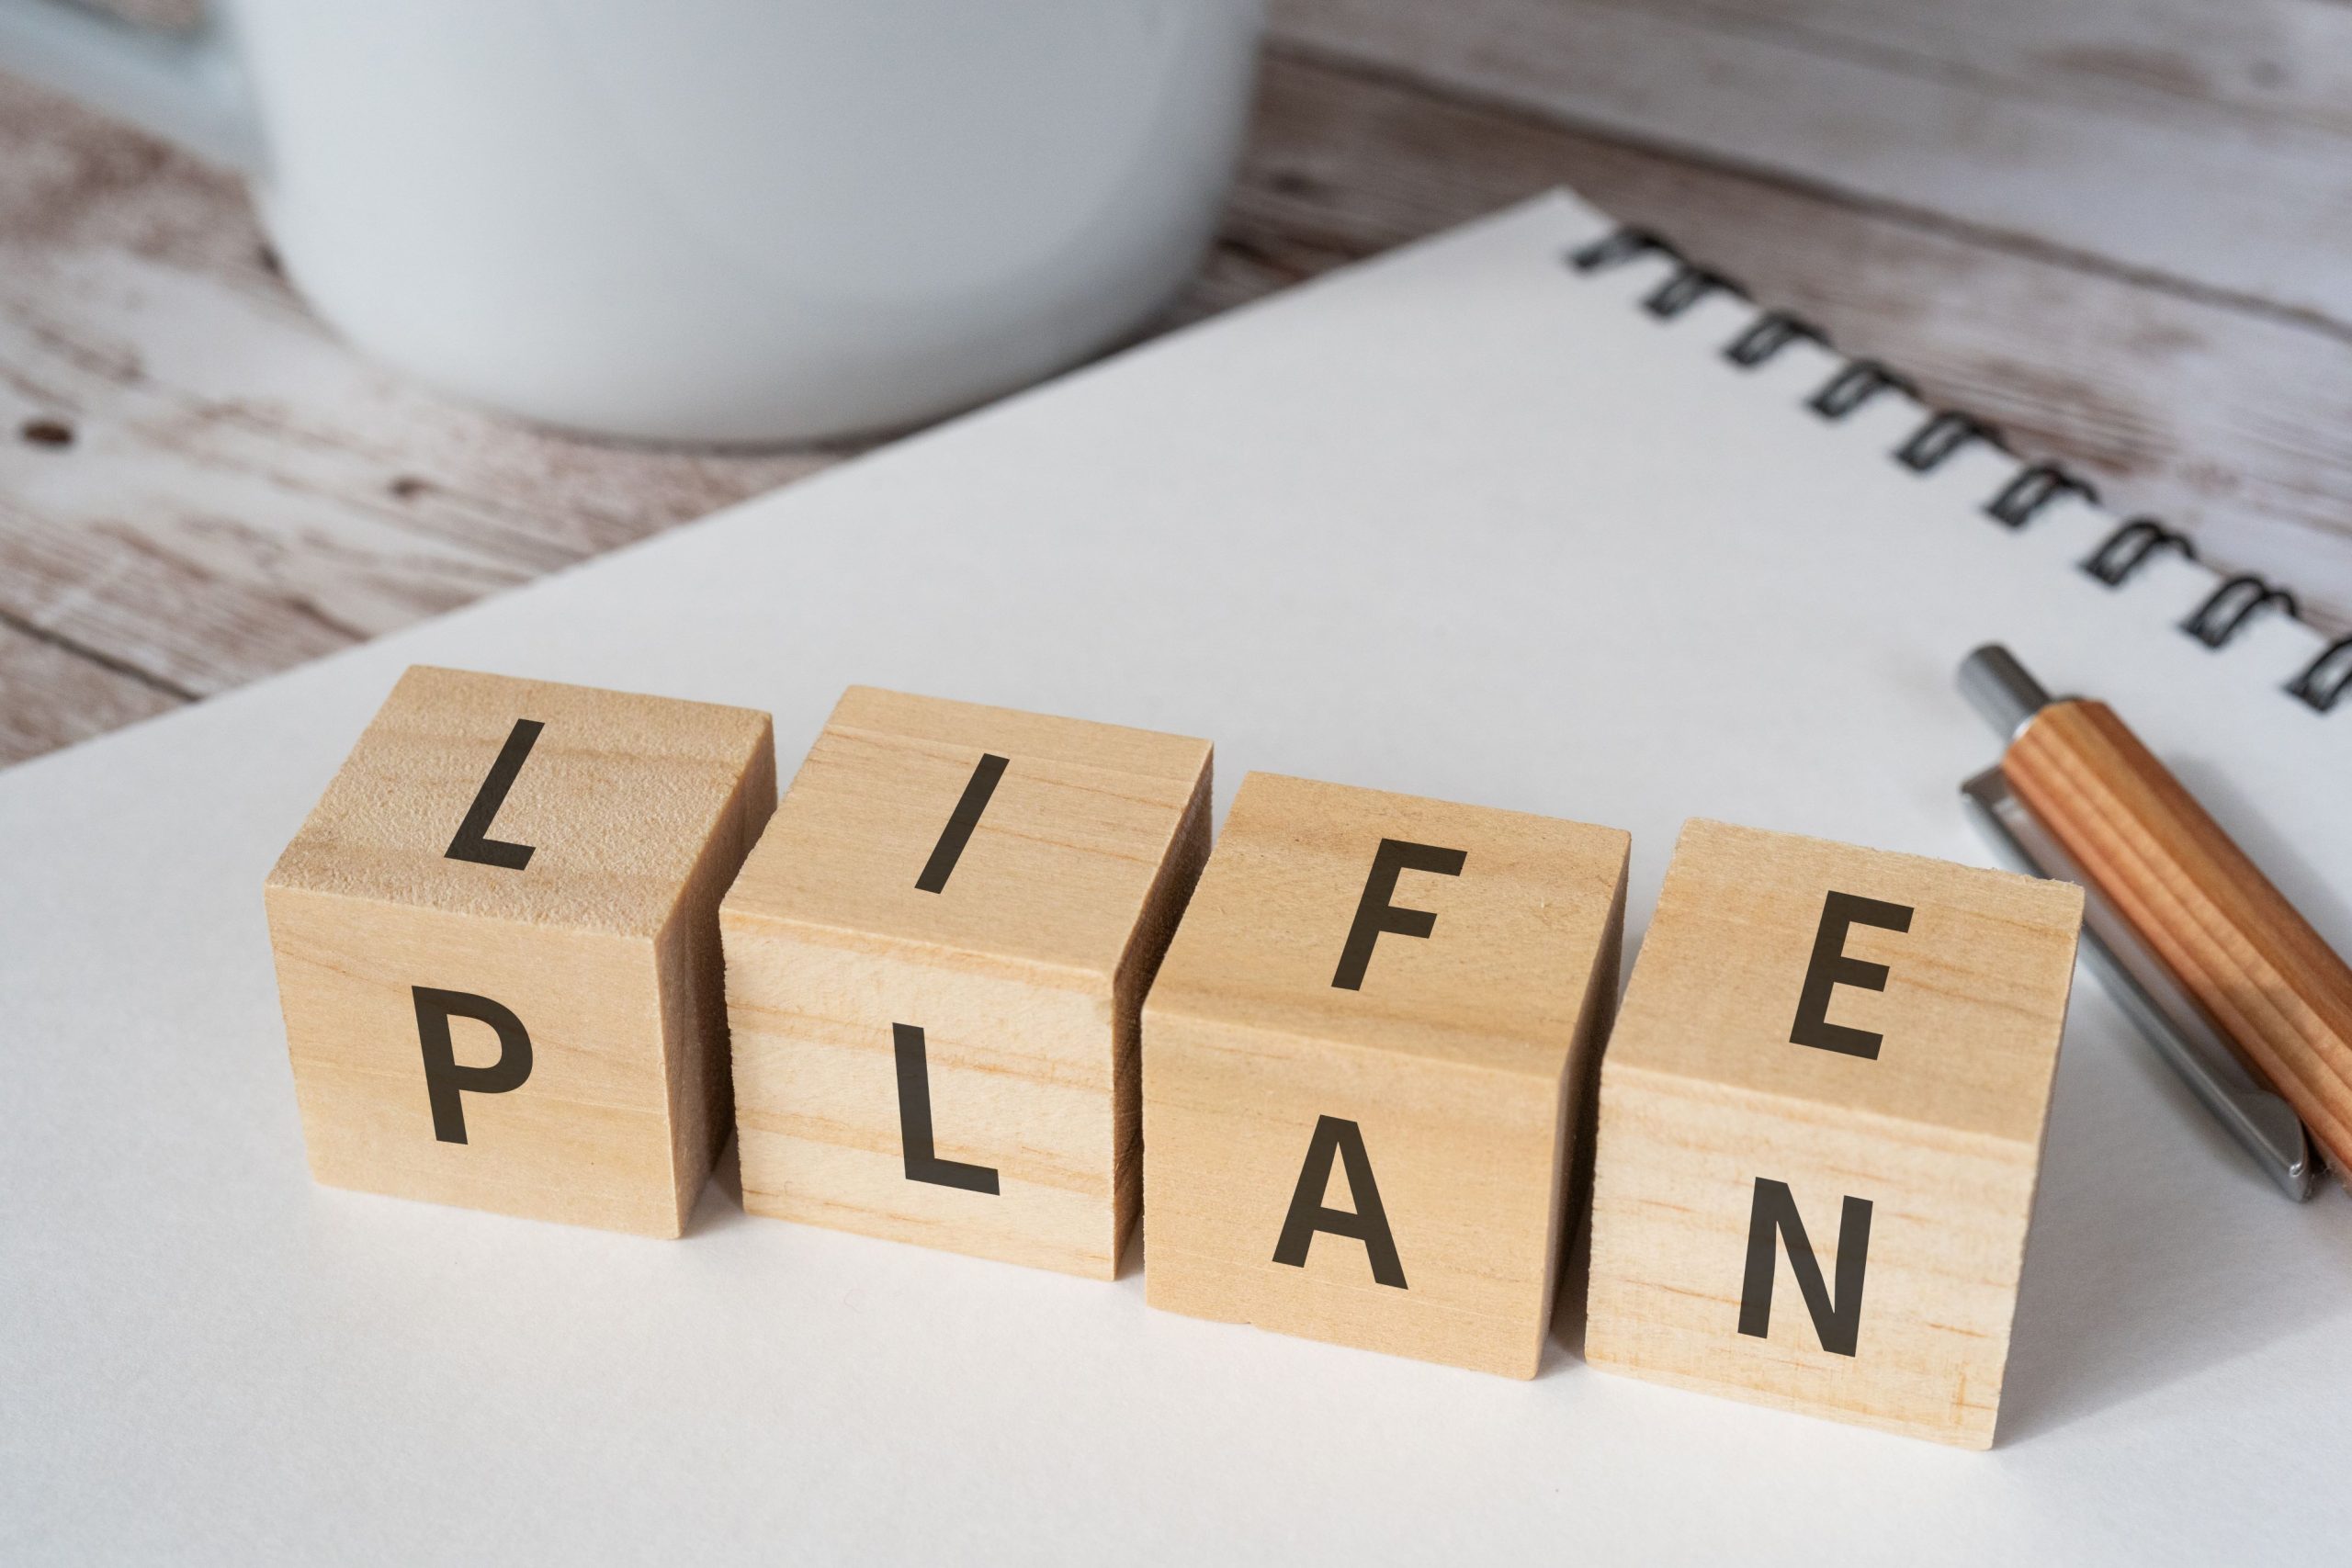 wooden-blocks-with-life-plan-text-concept-pen-notebook-cup-2-scaled.jpg